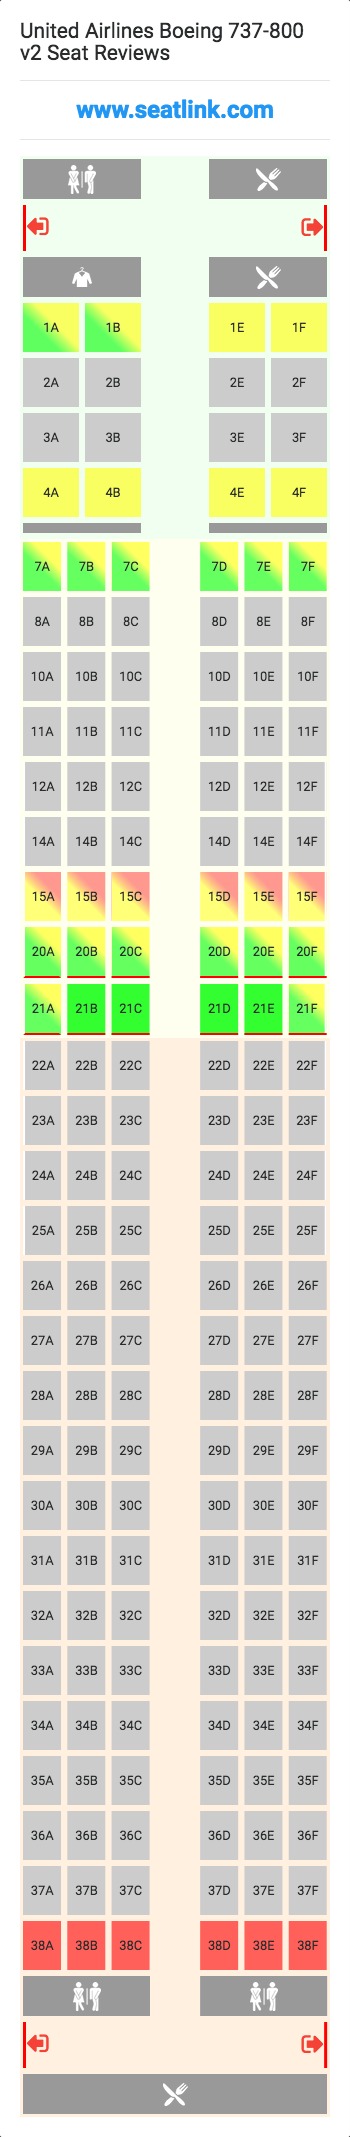 seat assignments for united airlines